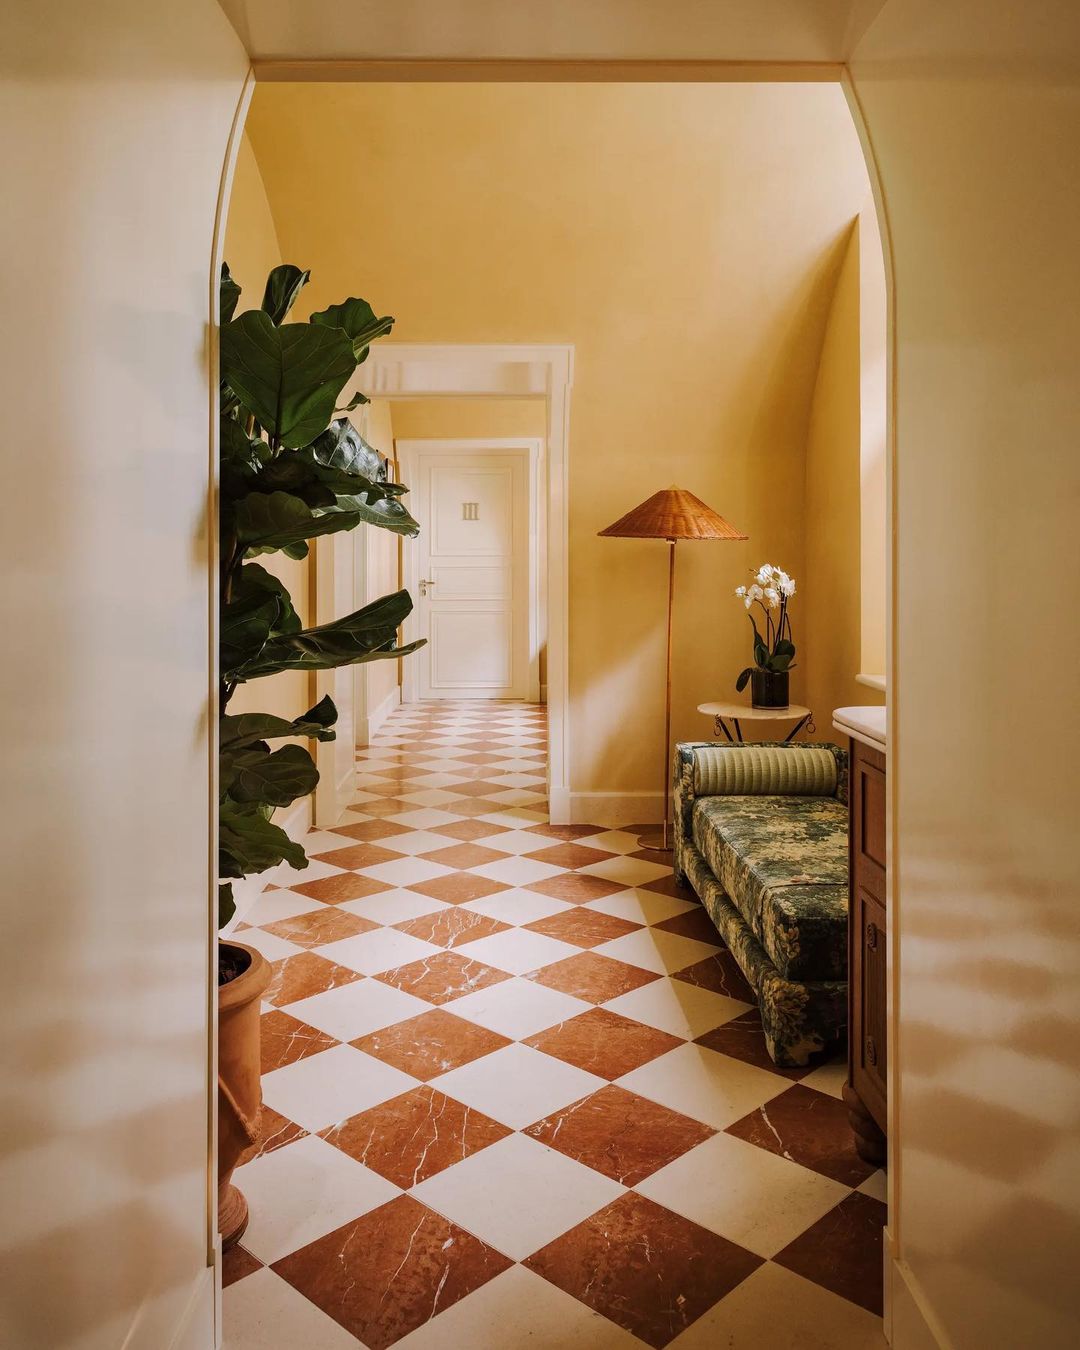 A brown and white checkered floor in the corridor leading to the Guerlain Spa at Saint James Paris, accented by a green pastoral patterned chaise lounge and skinny rattan floor lamp